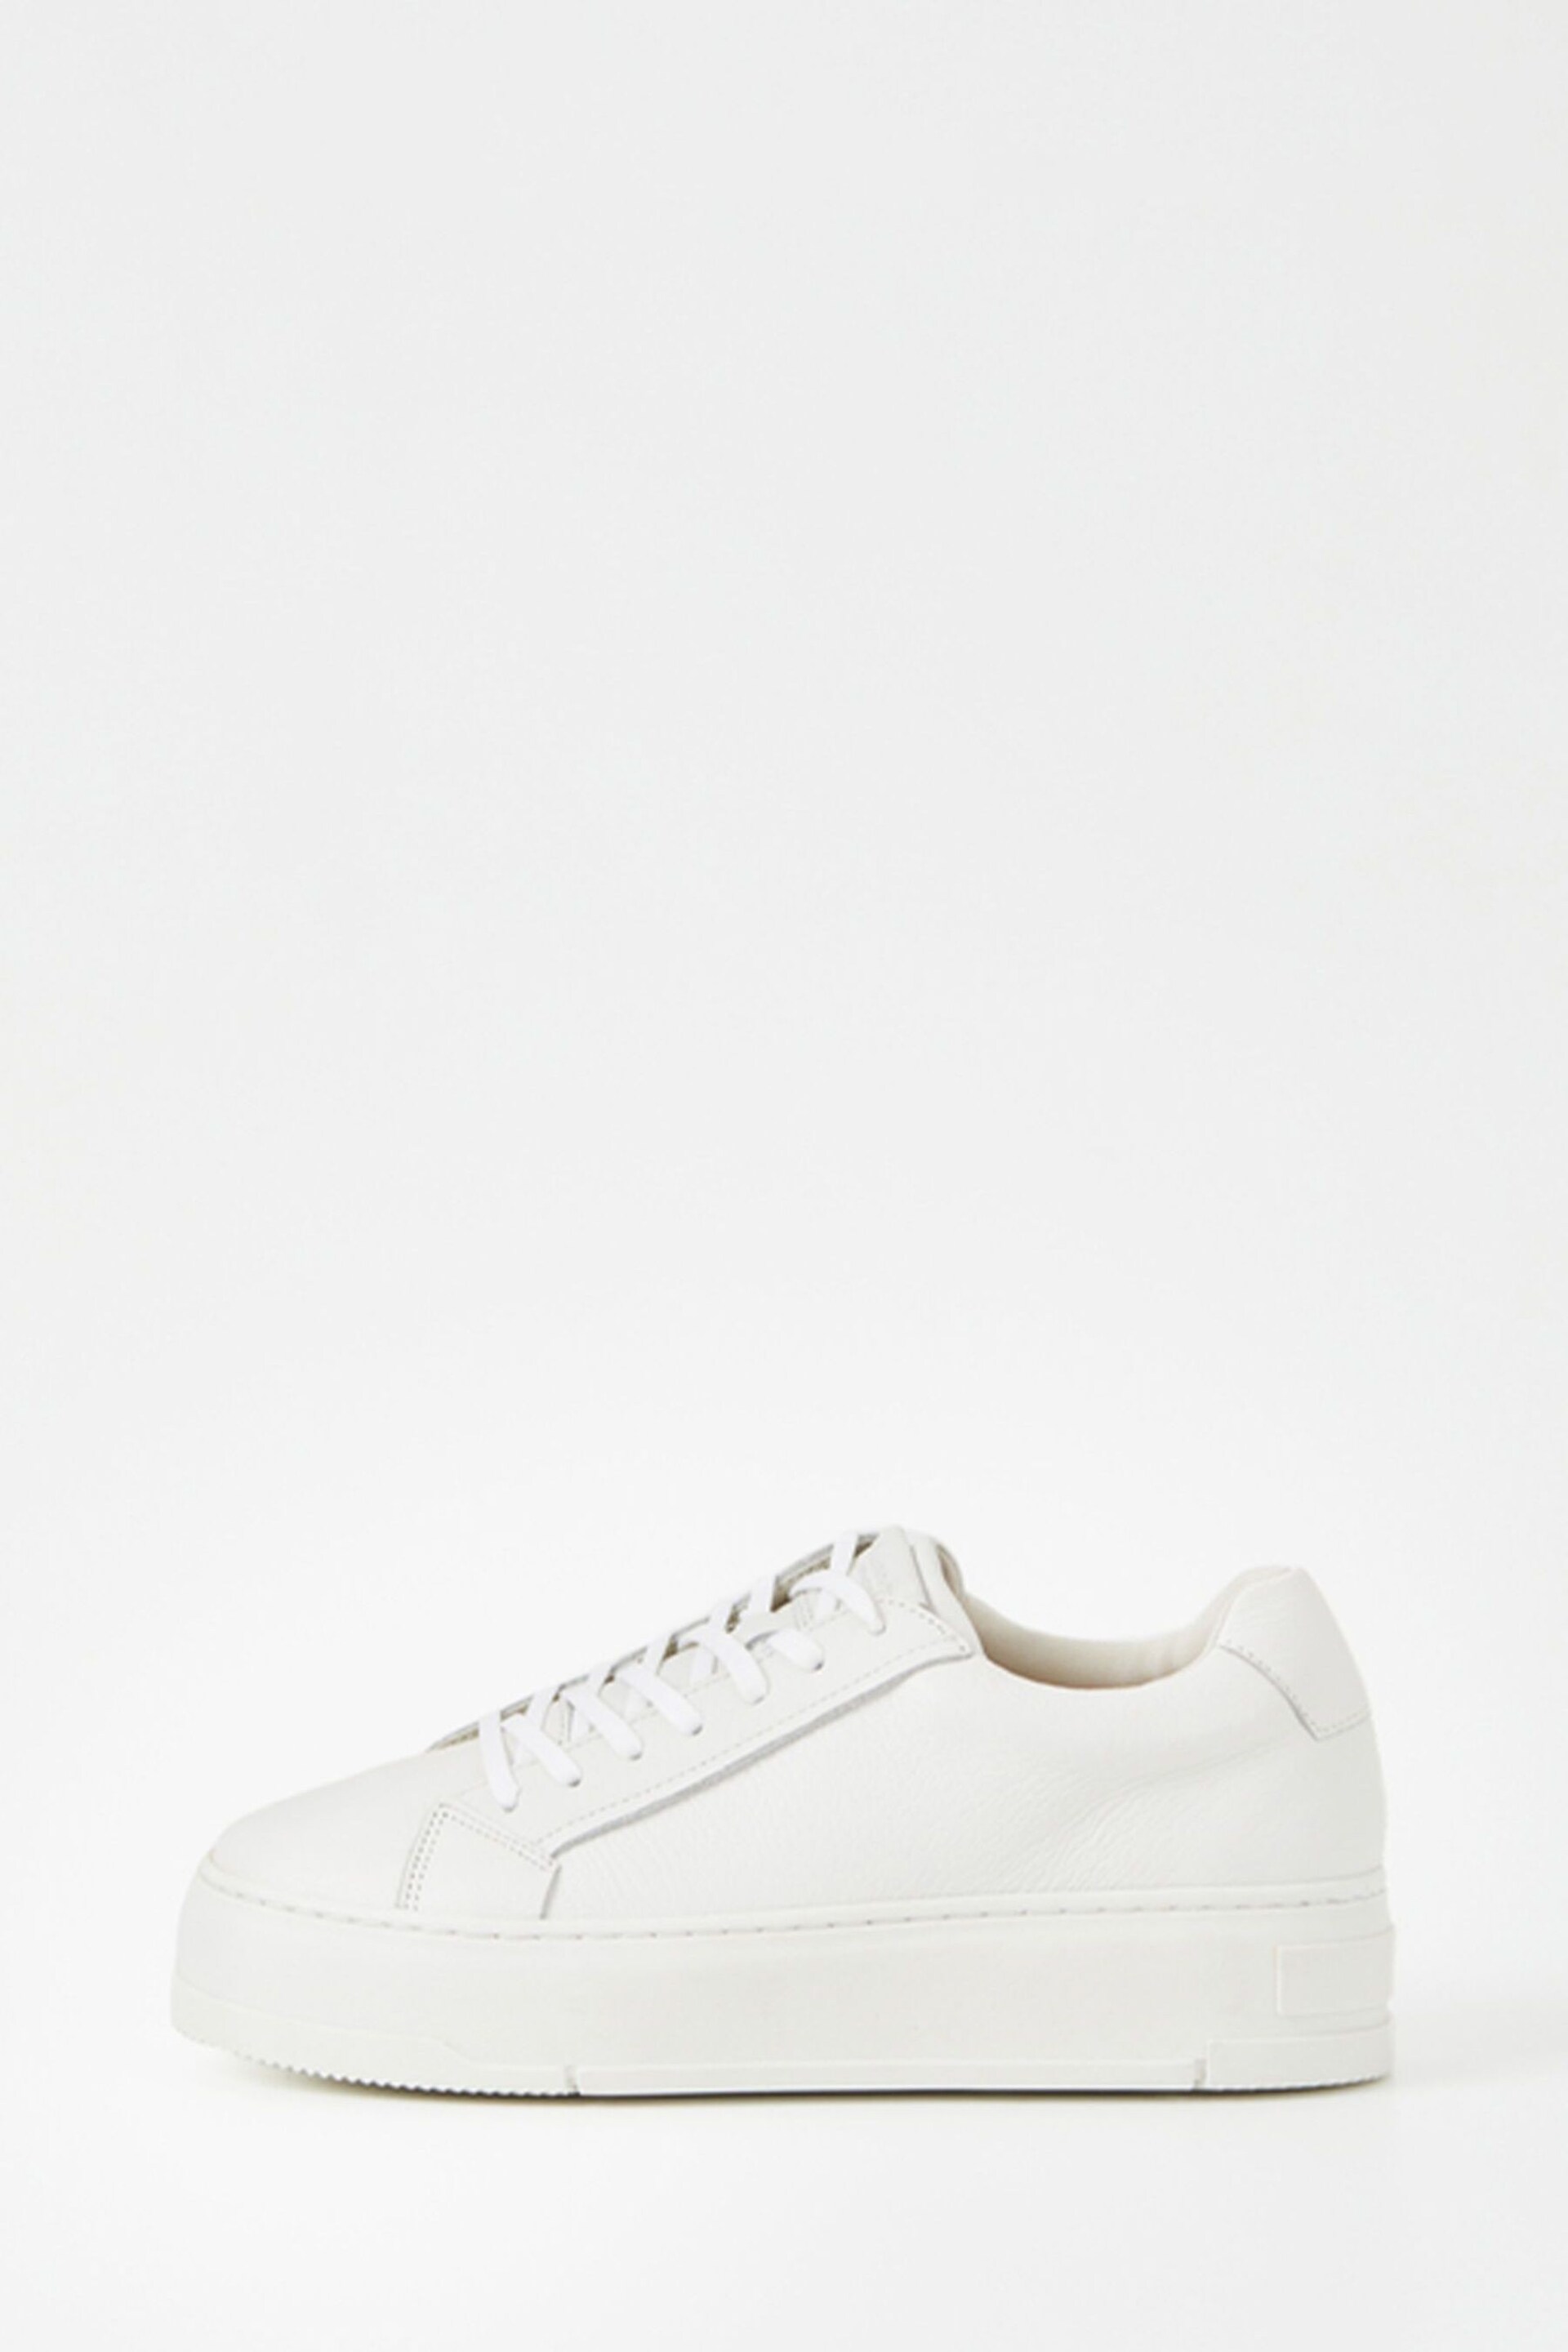 Vagabond Judy White Leather Trainers - Image 1 of 3